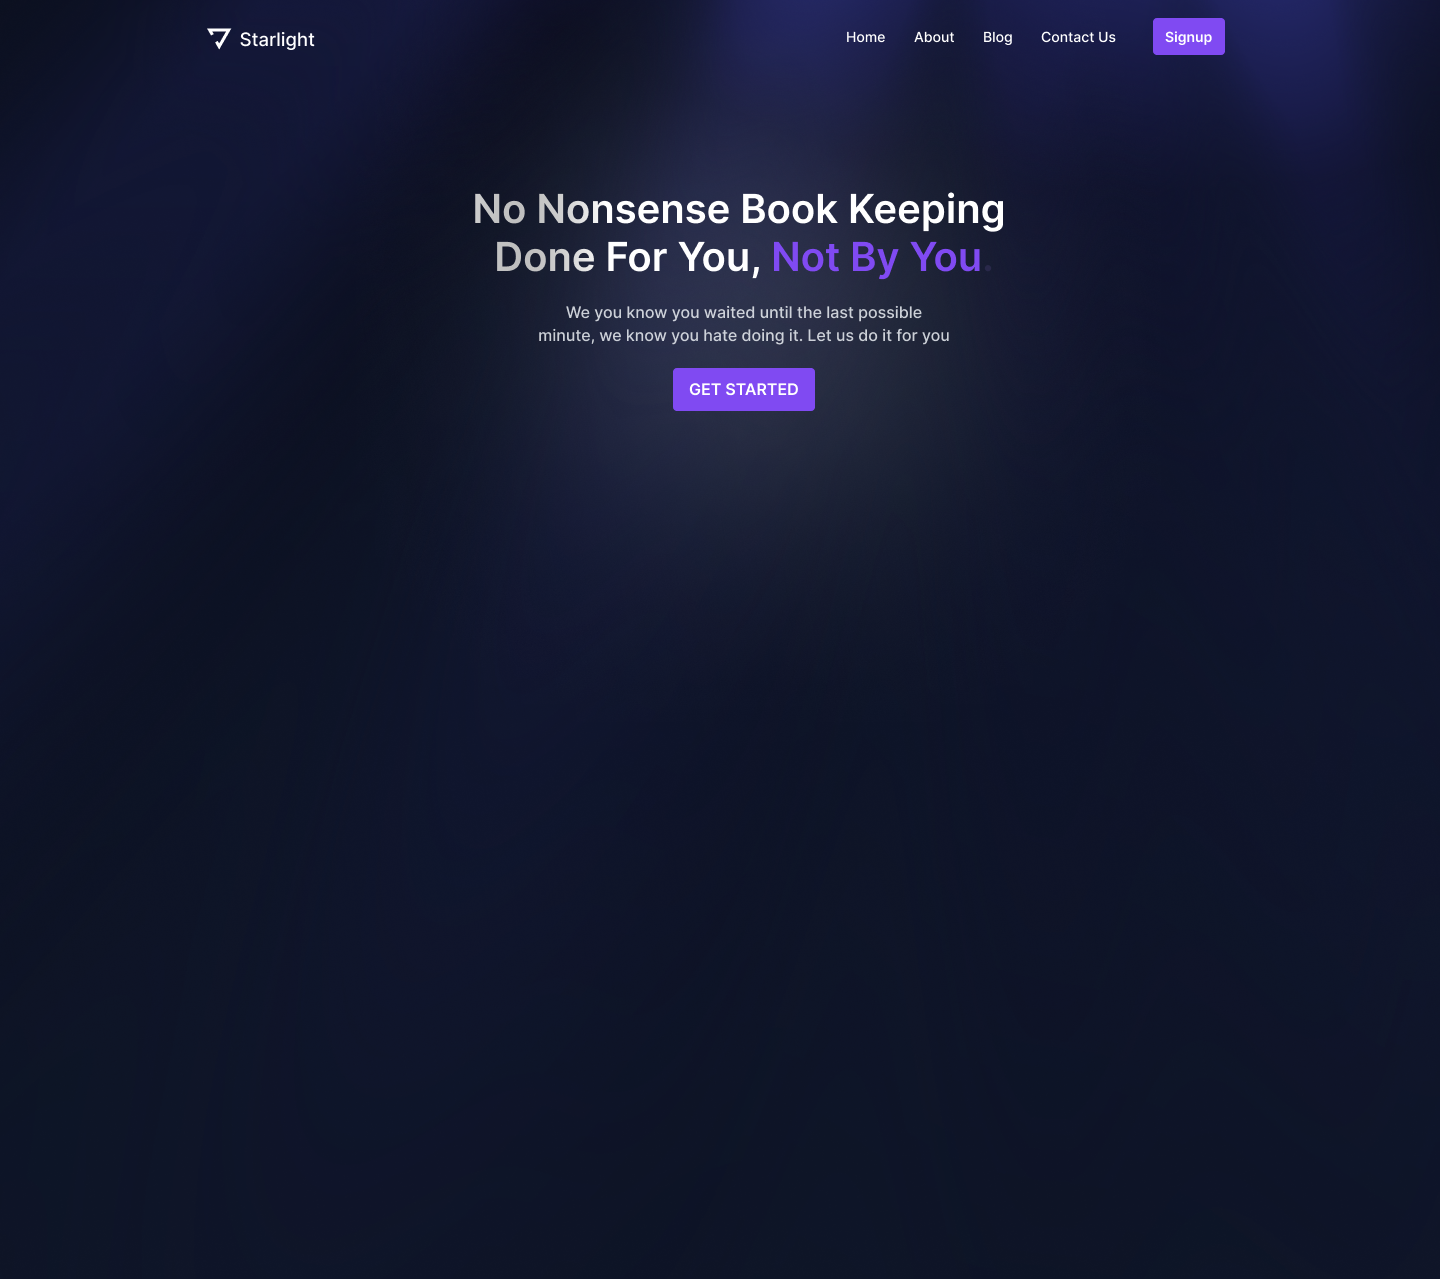 Dark navy background with purple with white text and purple call to action button 